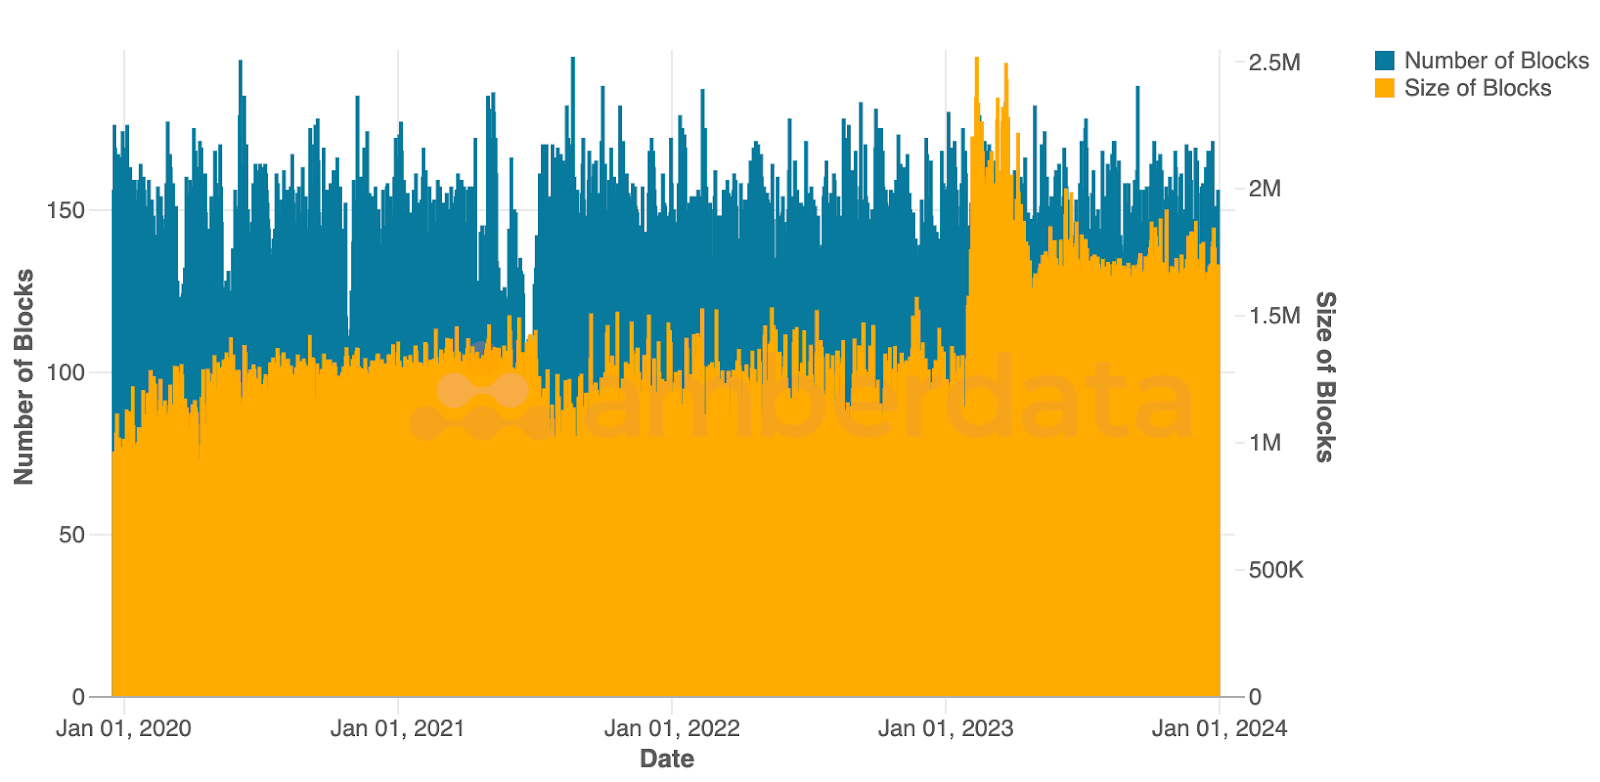 Amberdata Bitcoin’s daily network block count and size since Jan 2020